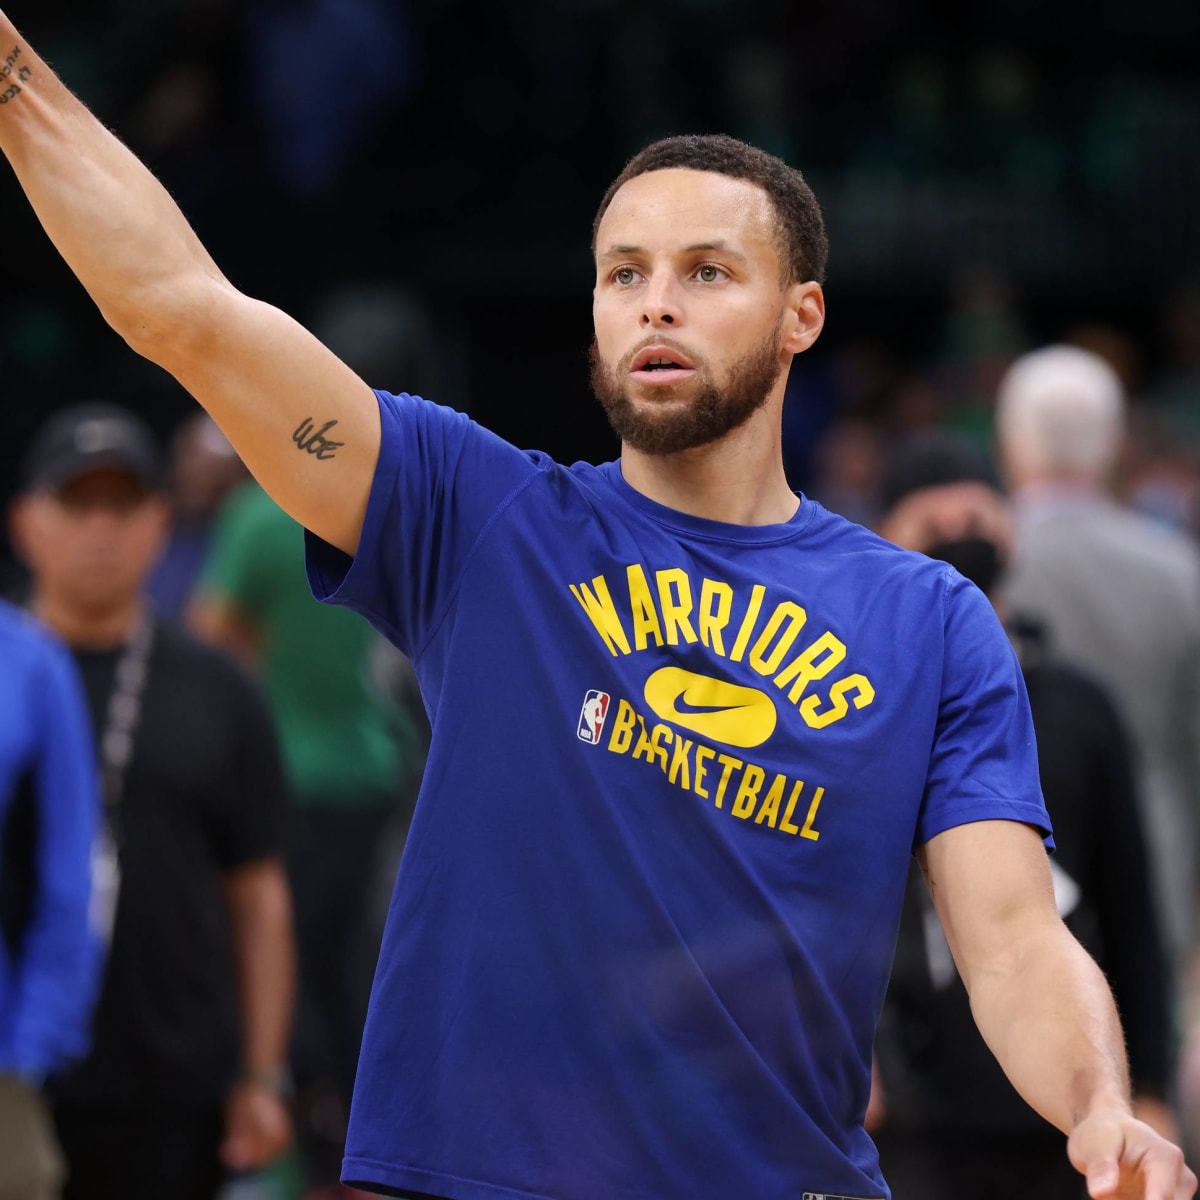 Stephen Curry hits hole-in-one at celebrity tournament, celebrates  appropriately